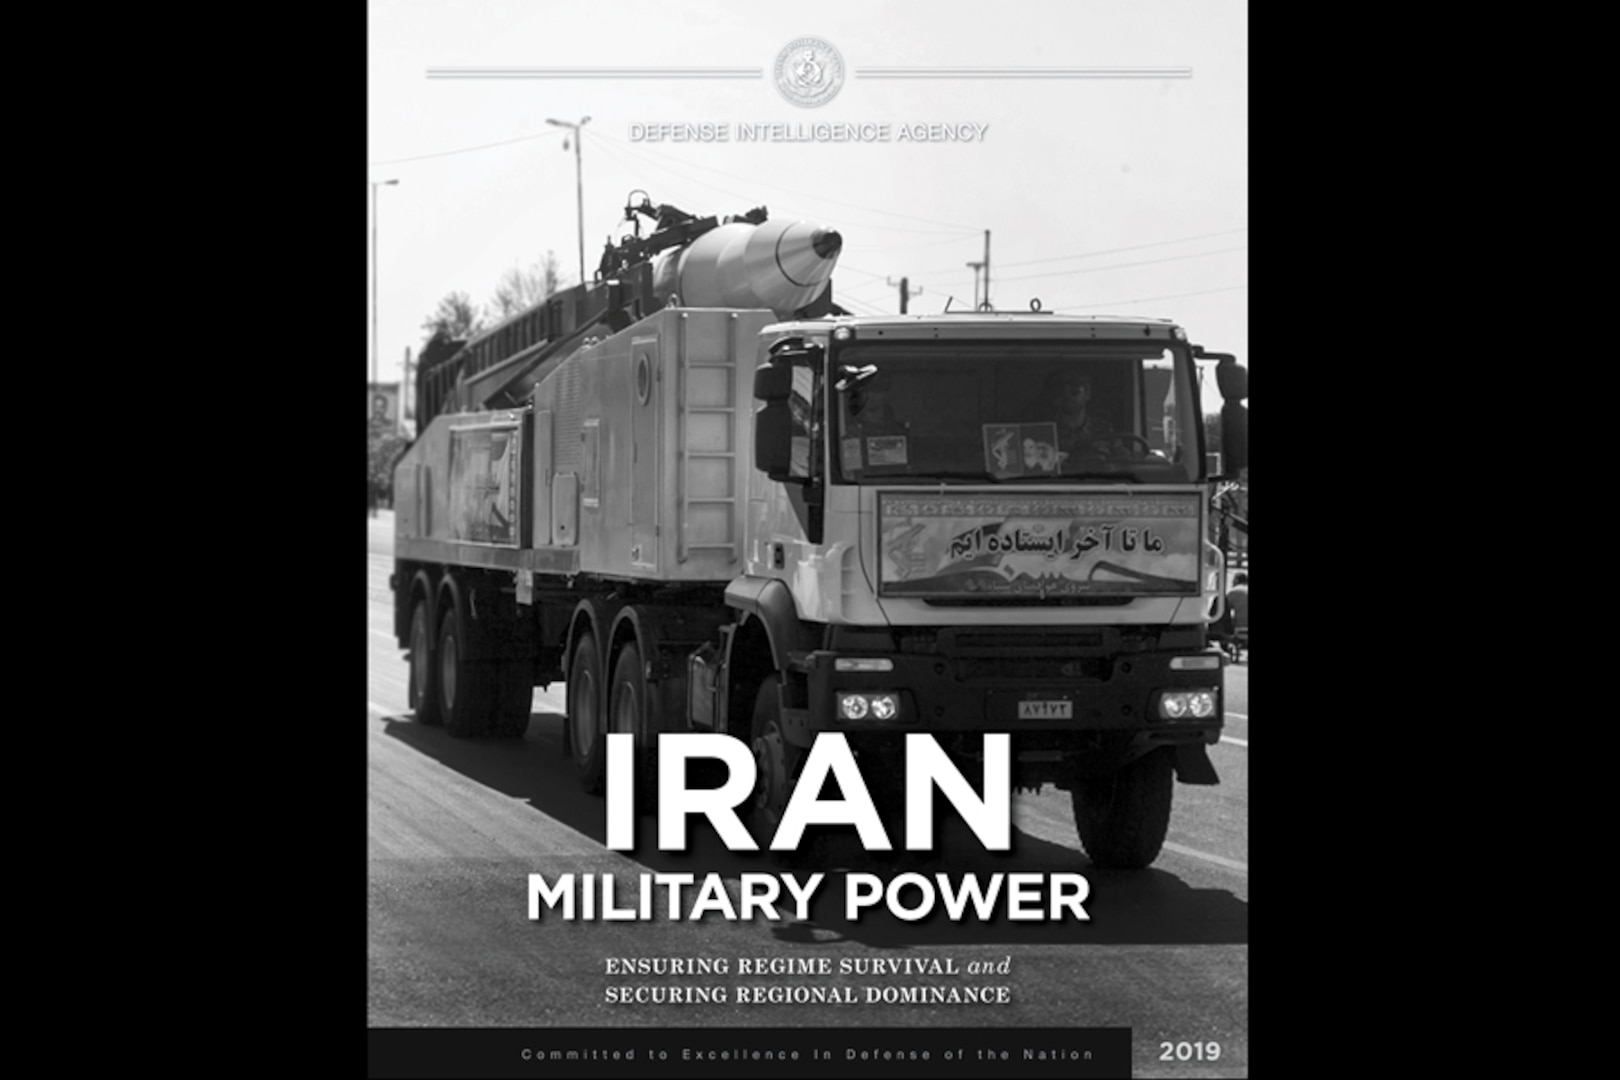 This volume in DIA's series of military power reports provides details on Iran's defense and military goals, strategy, plans, and intentions. It examines the organization, structure and capability of the military supporting those goals, as well as the enabling infrastructure and industrial base.